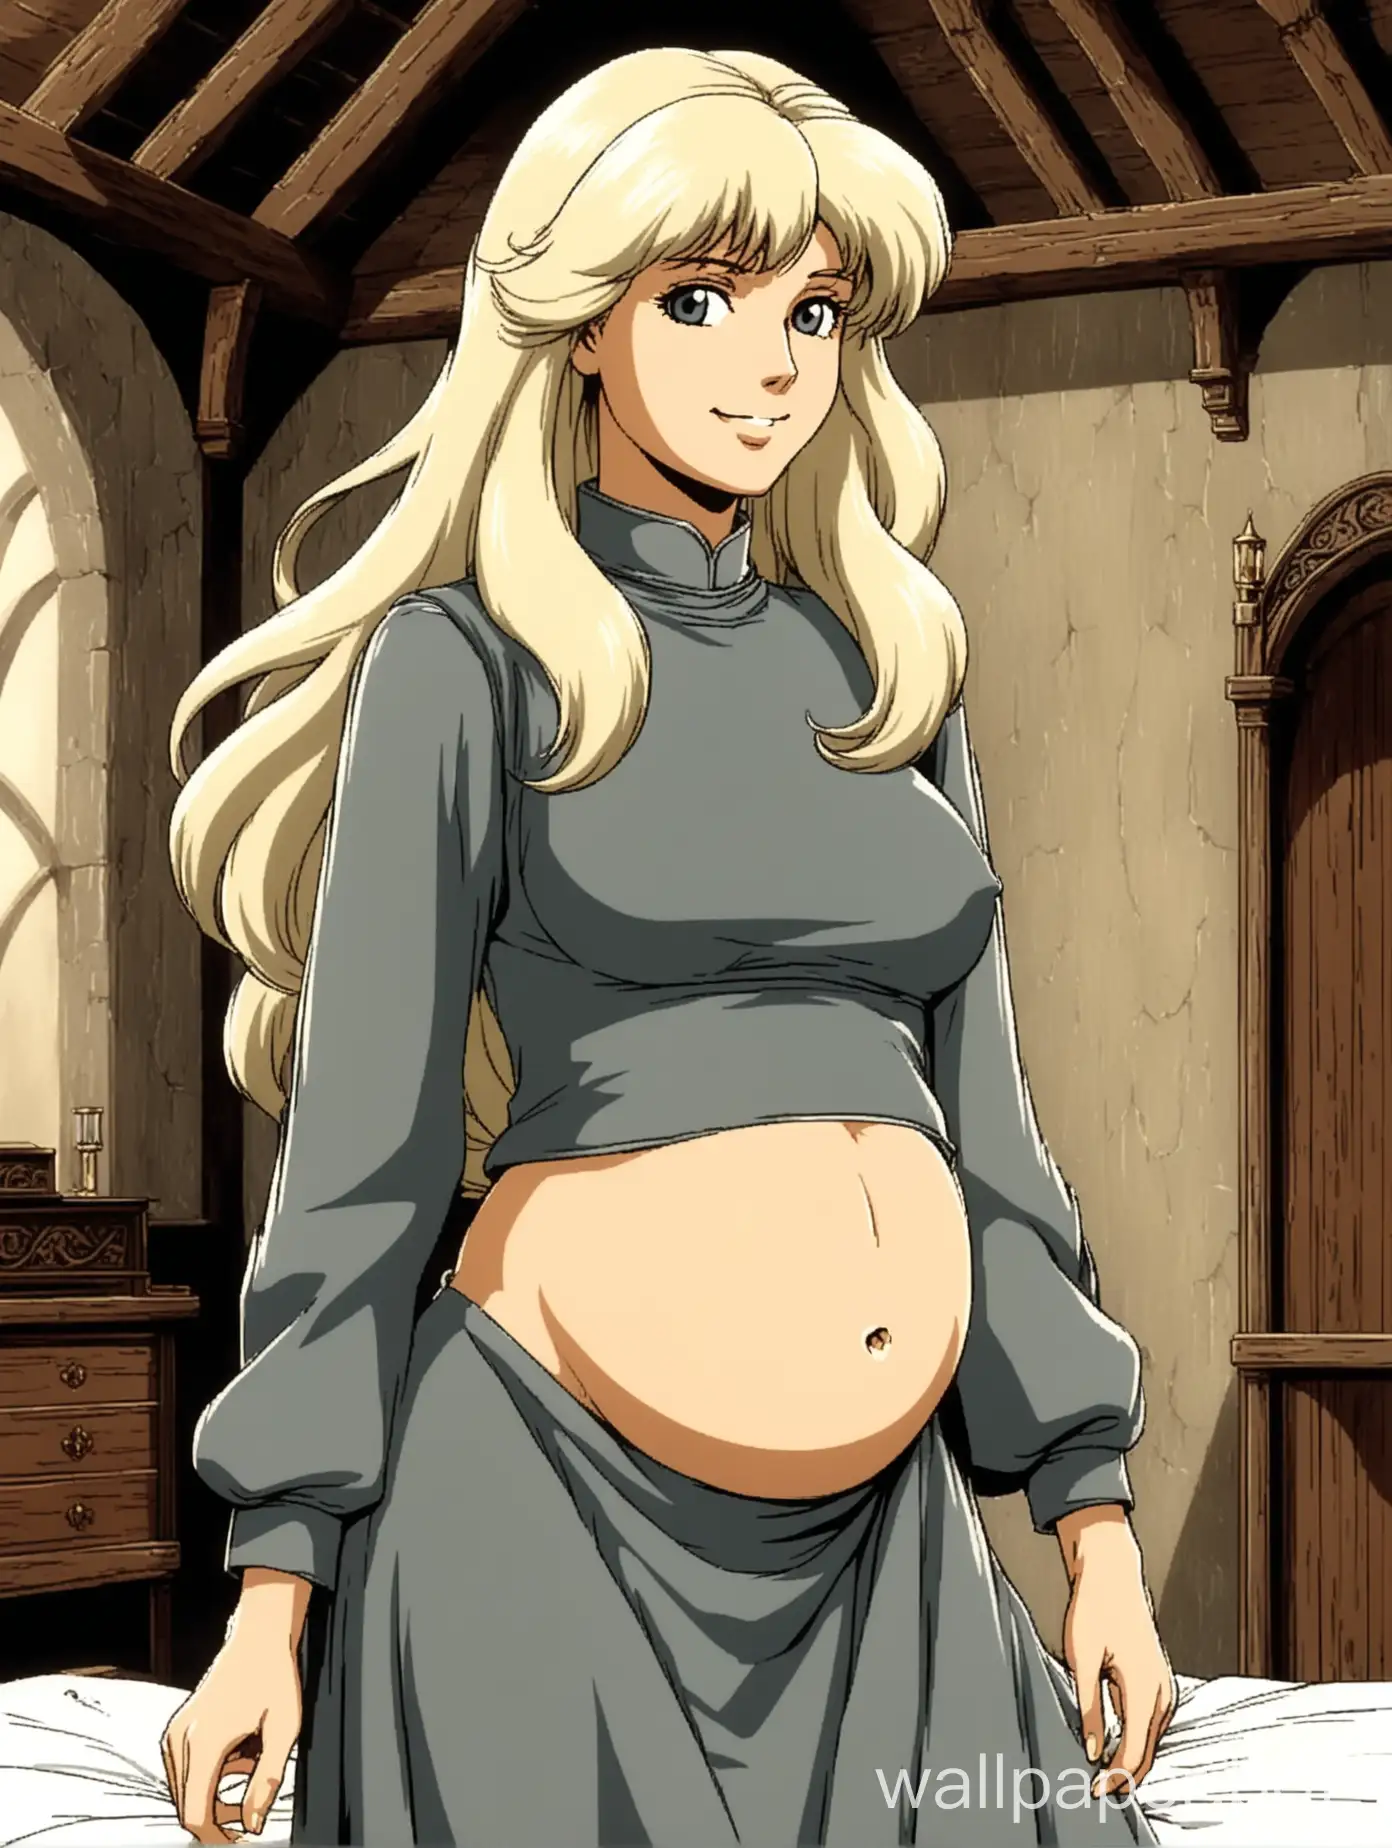 1980s retro anime, portrait of a young and attractive white woman, she is pregnant, she has long messy wavy white-blonde hair, standing regally, elegant and slender, thin sharp face, smiling slightly, wearing a low-rise long dark grey skirt, navel, exposed belly, midriff, stomach, wearing a dark grey long sleeve crop top, medieval elegance, 1980s retro anime, medieval bedroom interior